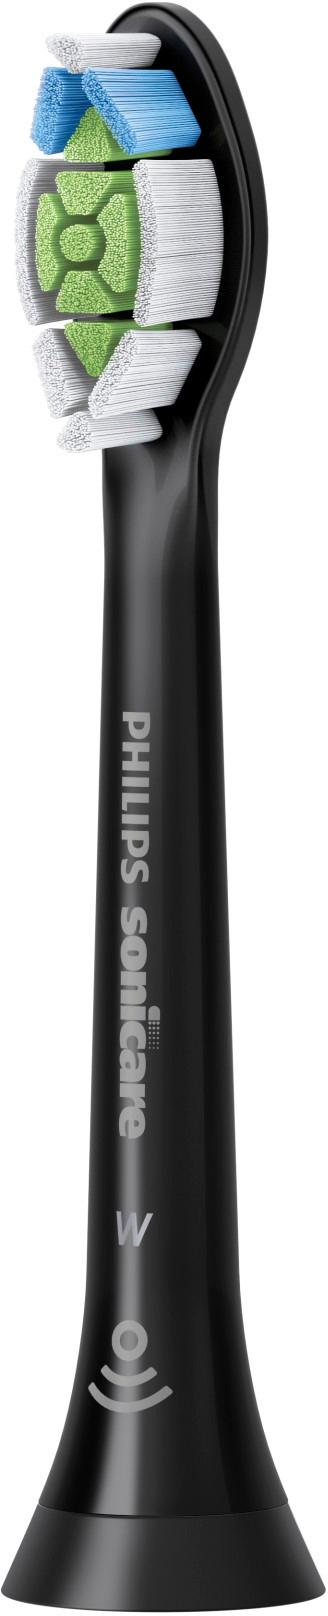 Left View: Philips Sonicare - DiamondClean Replacement Toothbrush Heads (4-pack) - Black